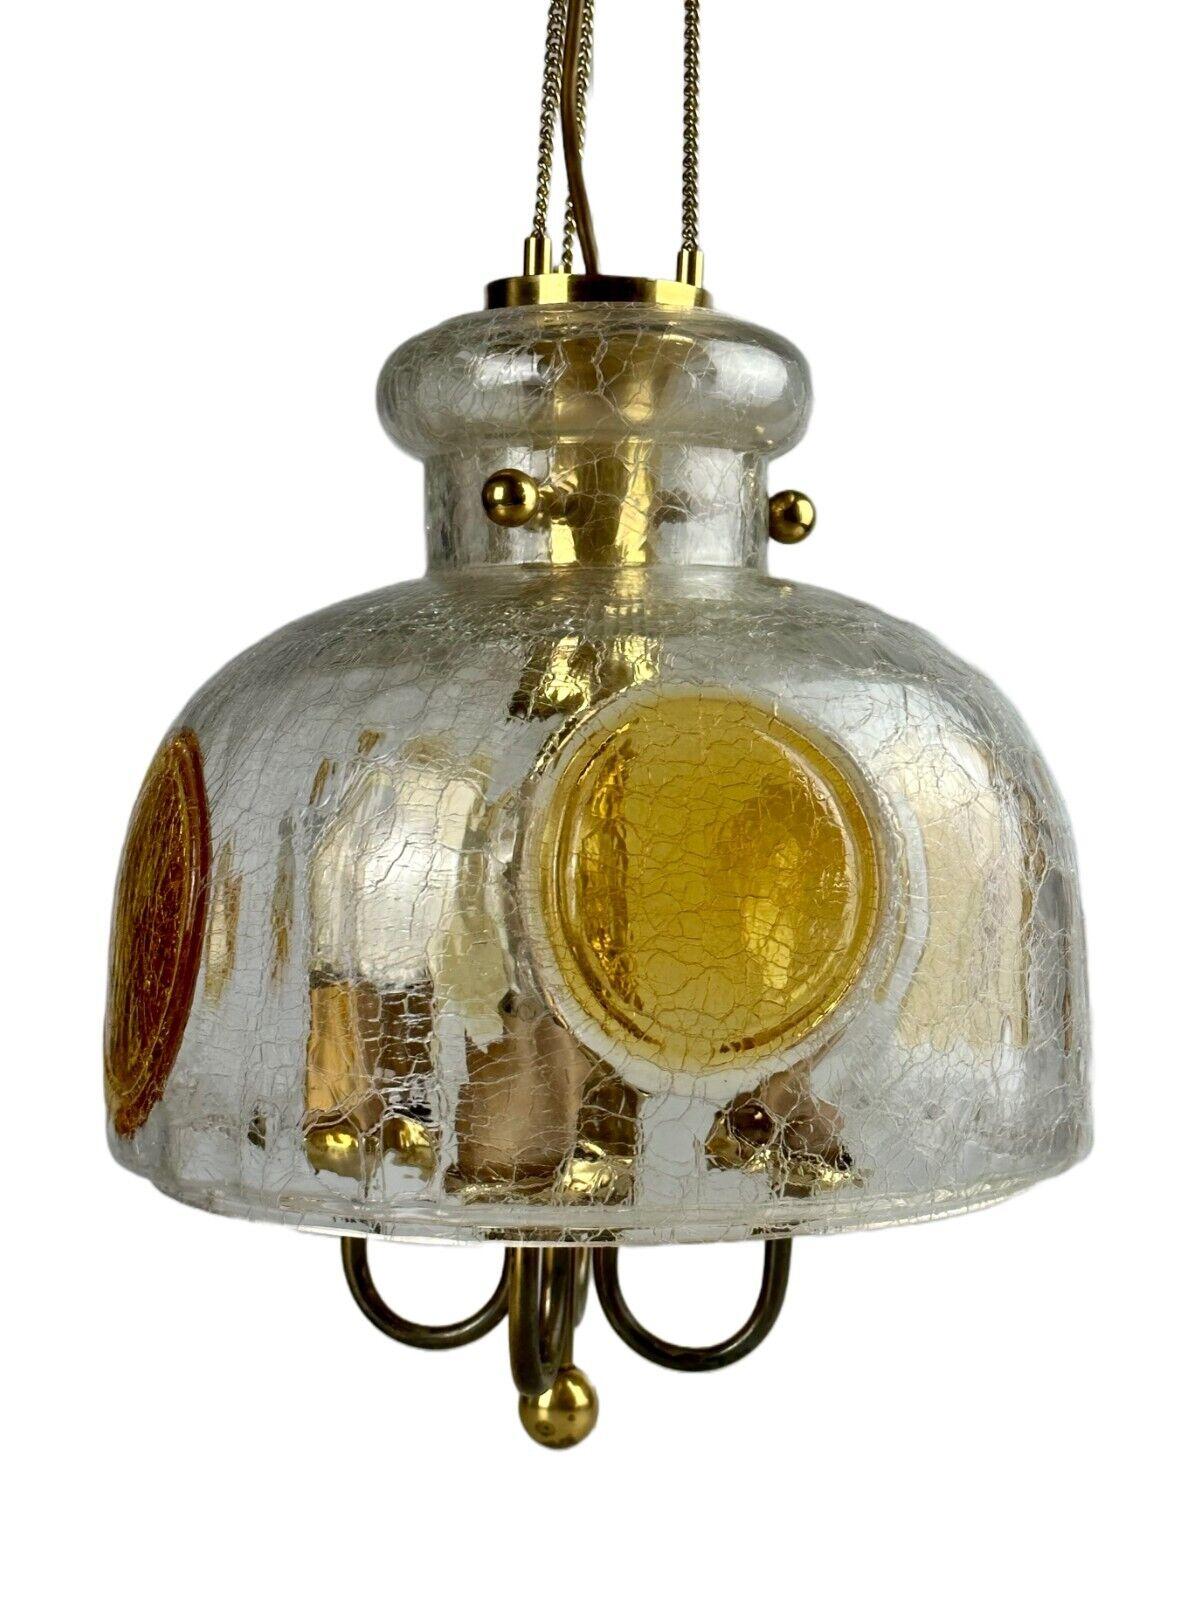 1960's 1970's Brutalist Ceiling Lamp Pendant Lamp Brass & Murano Glass

Object: ceiling lamp

Manufacturer:

Condition: good - vintage

Age: around 1960-1970

Dimensions:

Diameter 35cm
Height = 41cm

Other notes:

4x E27 socket

The pictures serve